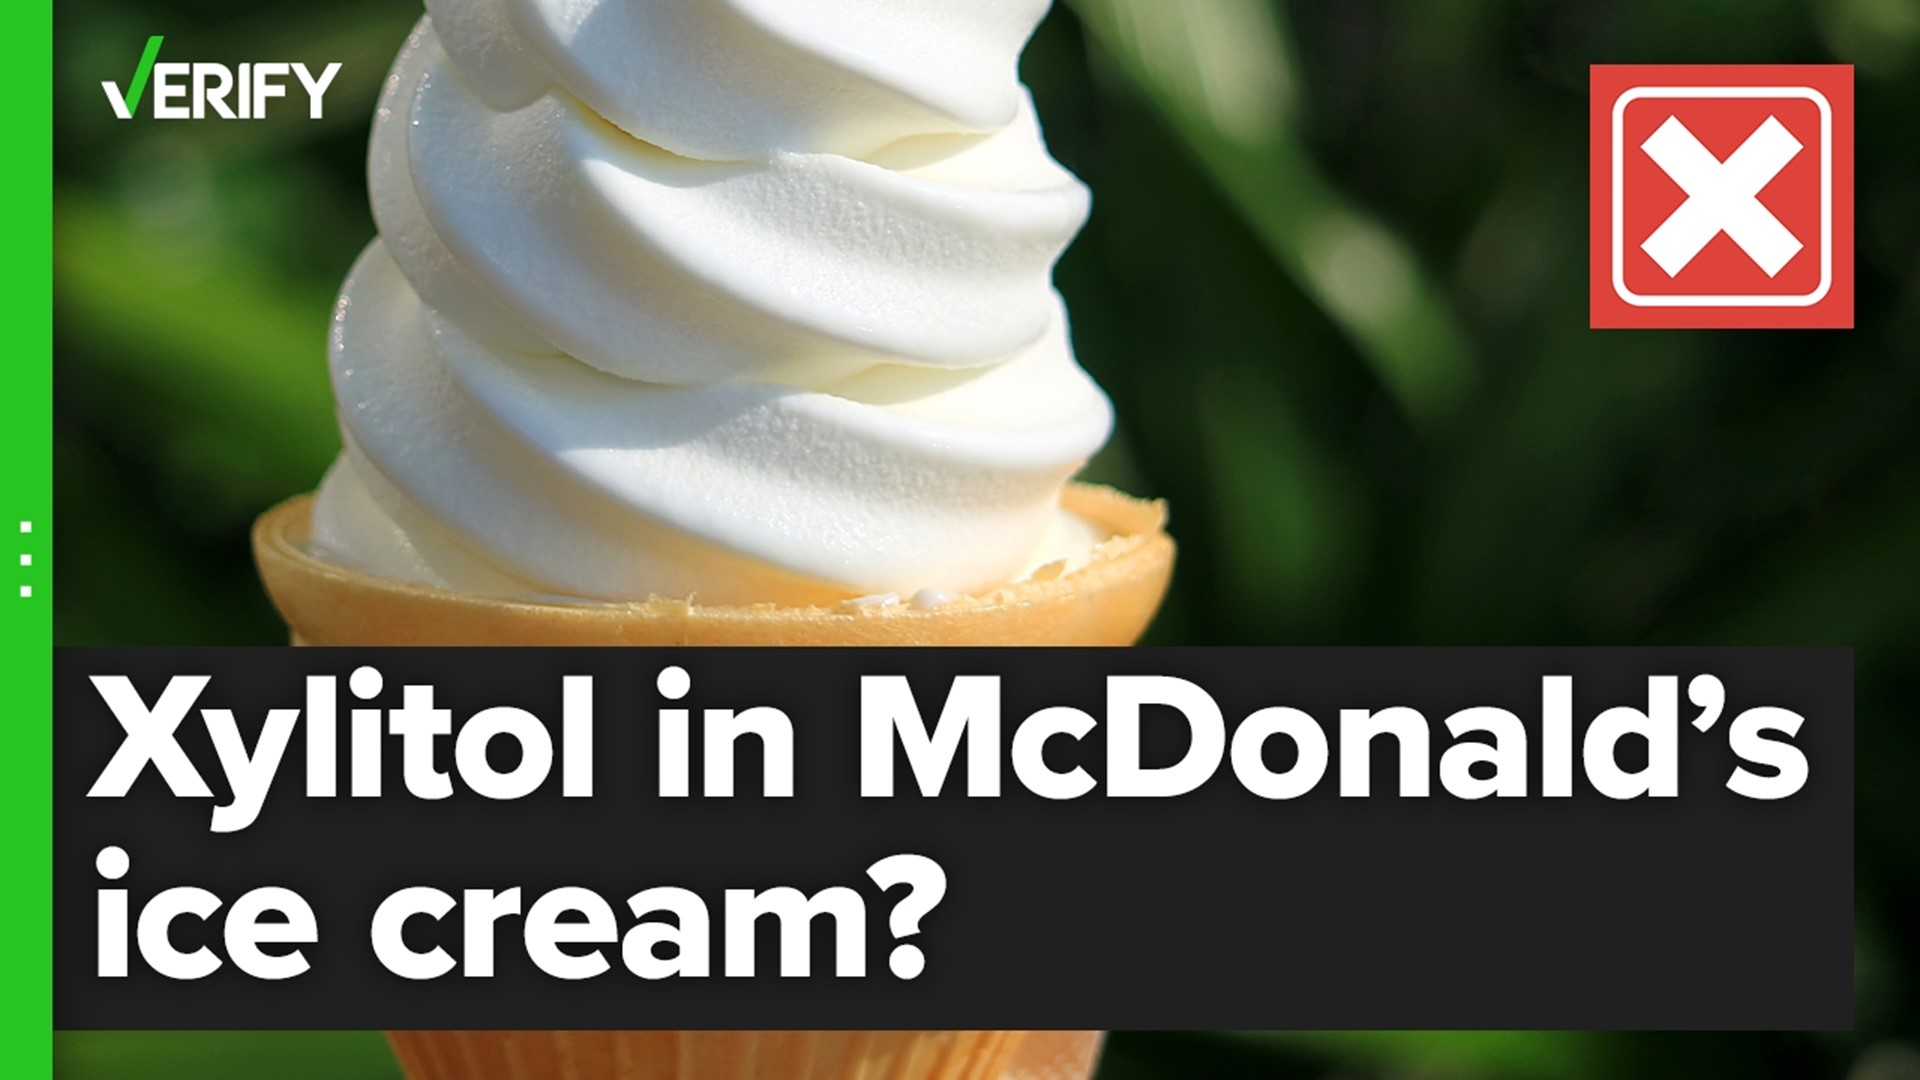 Ice cream “pup cups” are a popular dog treat. But some online posts warn McDonald’s ice cream has an ingredient toxic to dogs. That’s false.